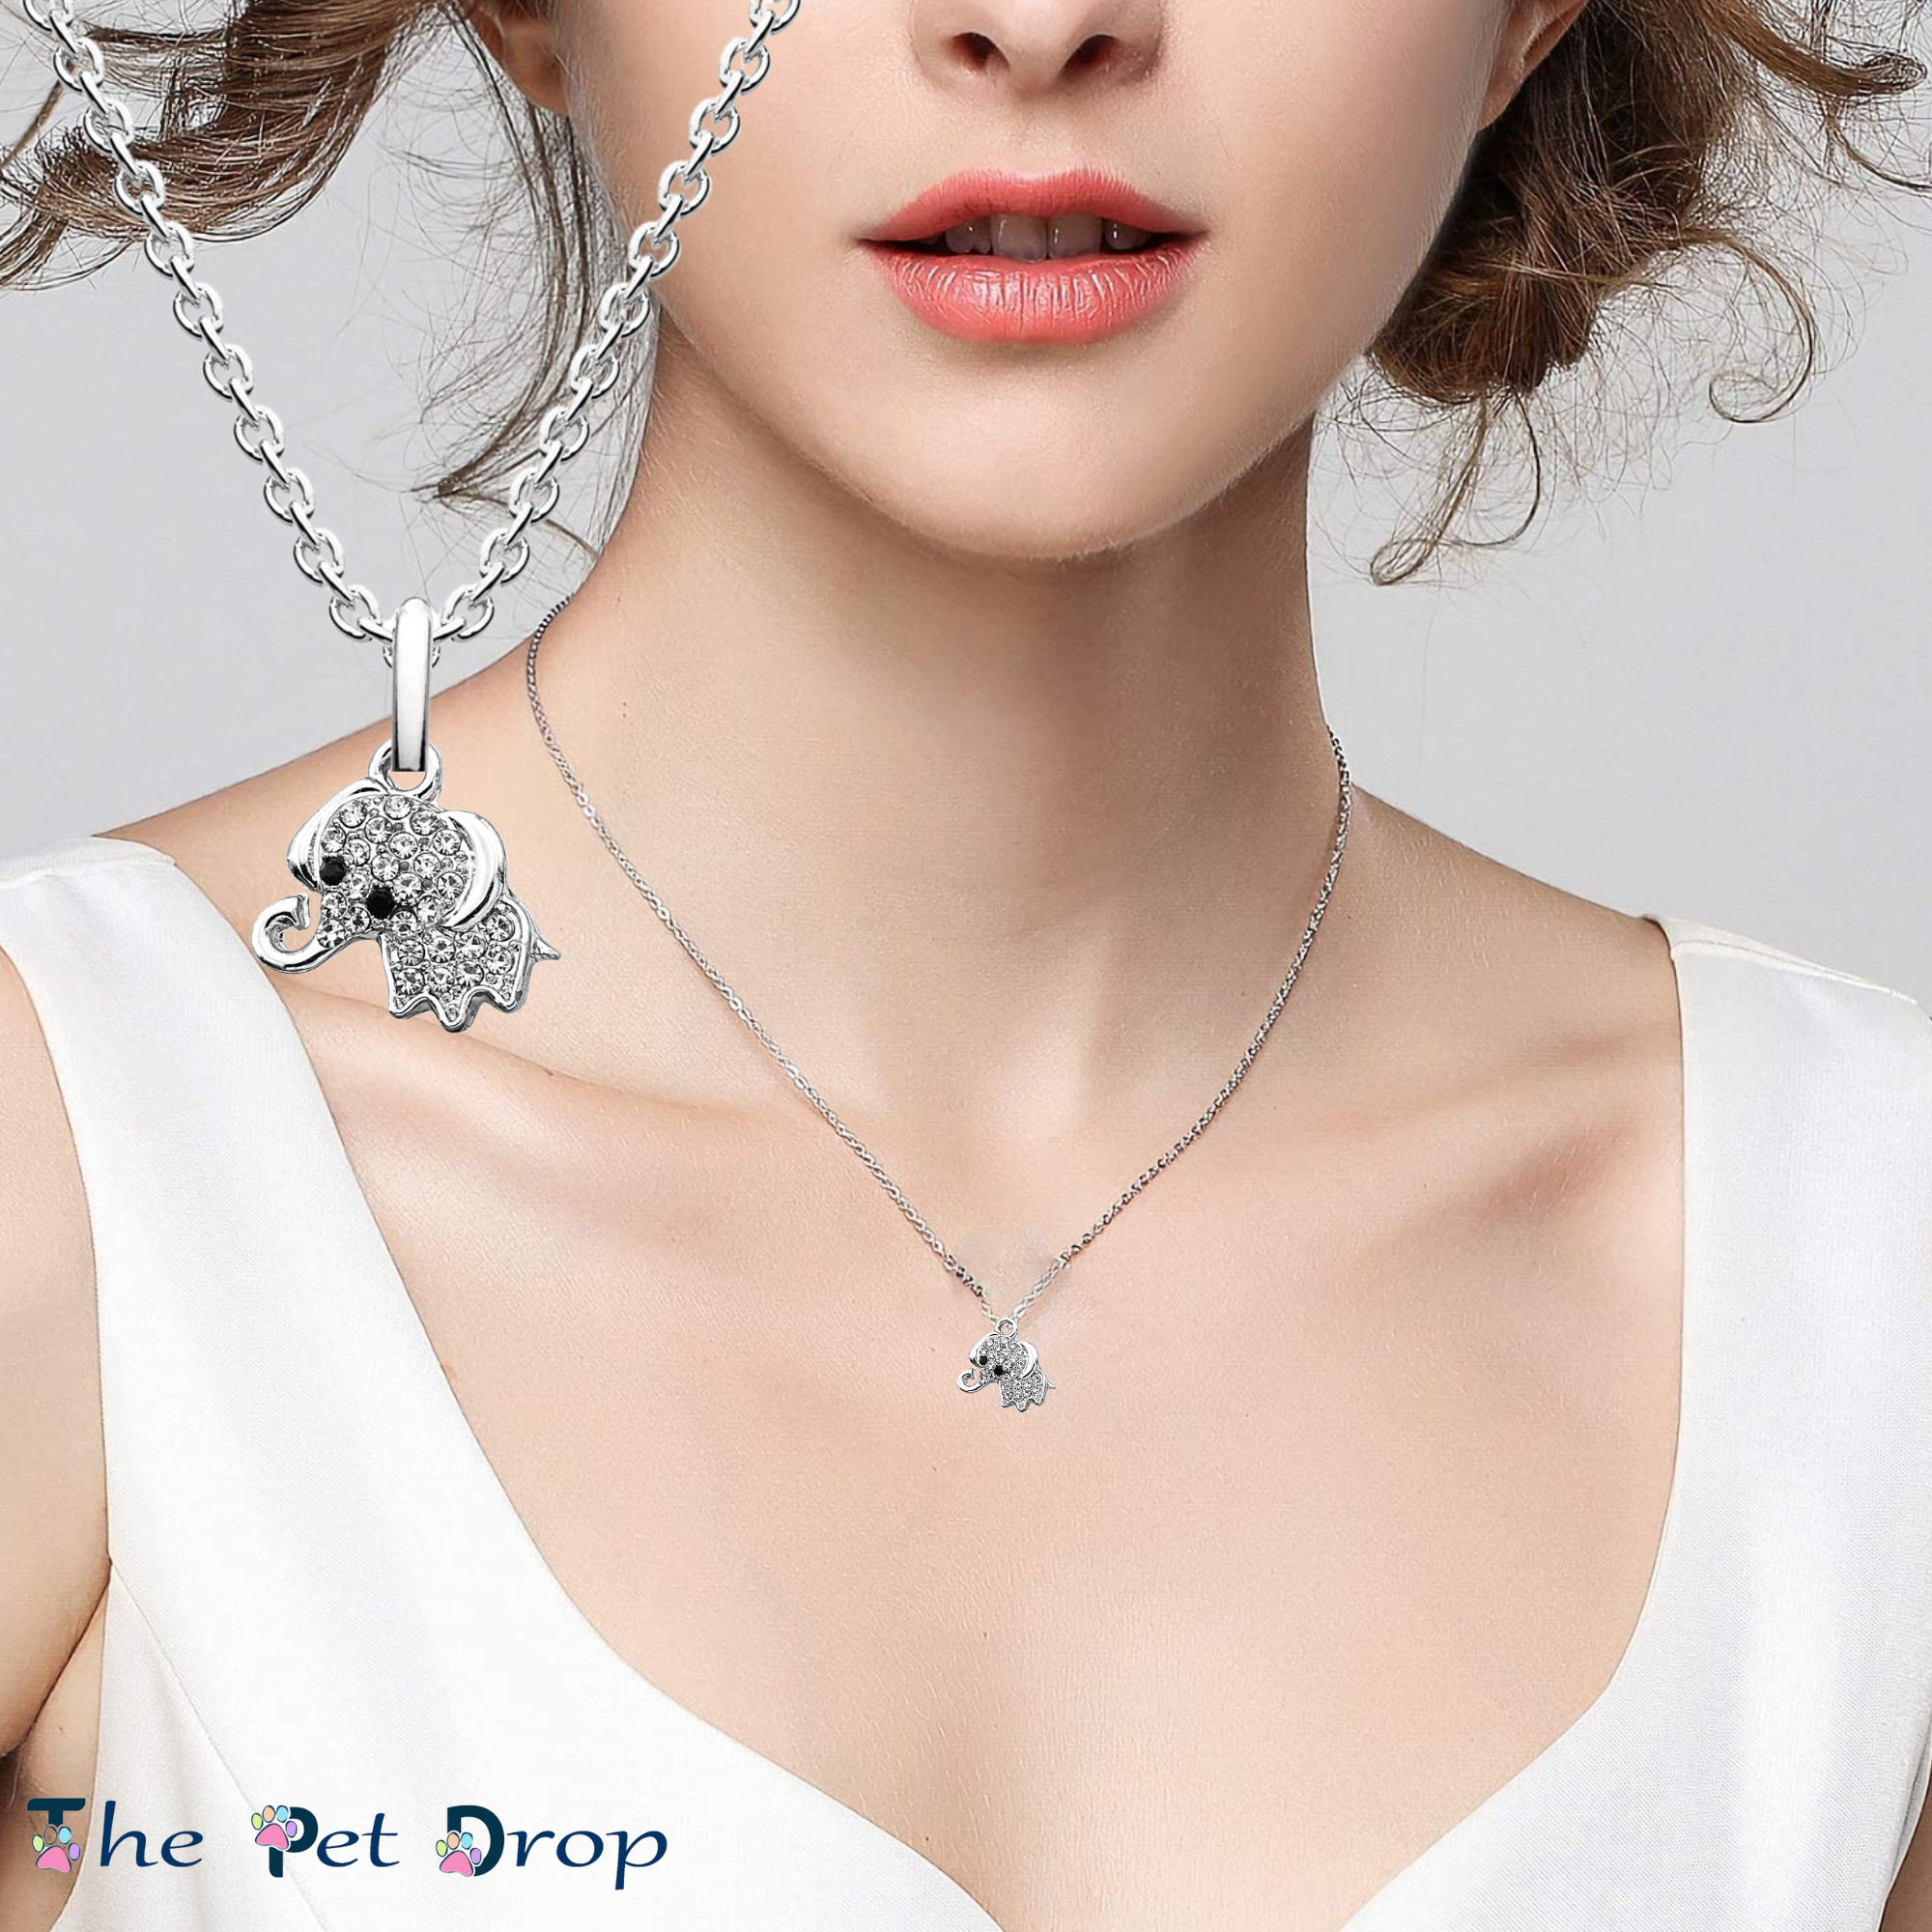 cute little crystal silver elephant hanging on a silver chain on a woman's neck.